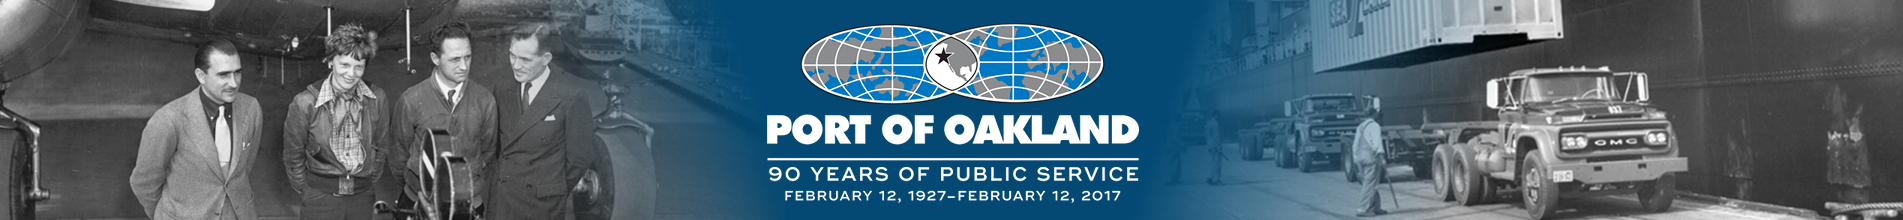 Image of Proclamation by Oakland Mayor, Libby Schaaf